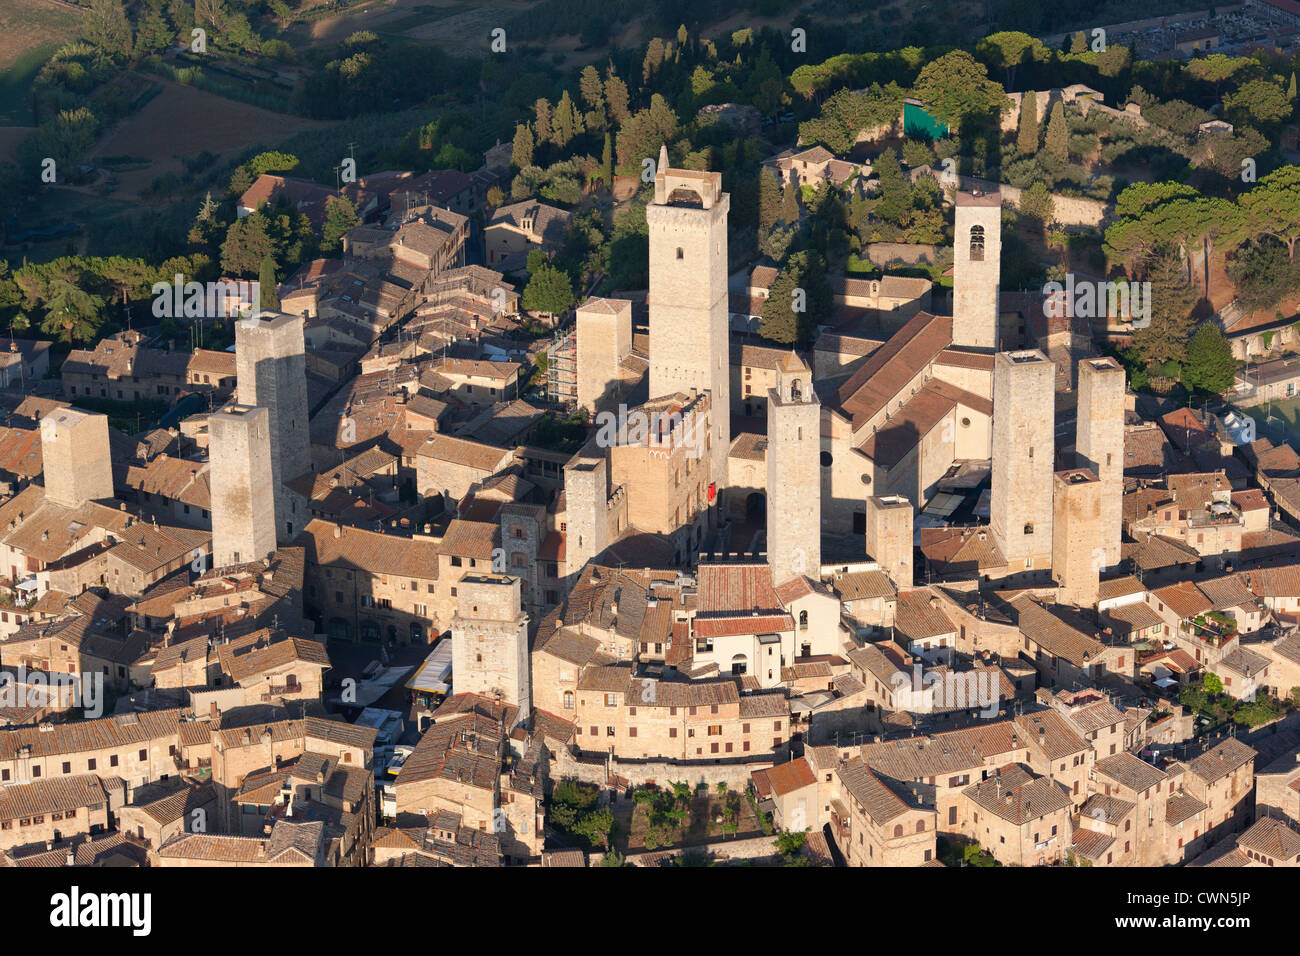 AERIAL VIEW. Medieval hilltop town with its many towers built by rich families centuries ago. San Gimignano, Province of Siena, Tuscany, Italy. Stock Photo